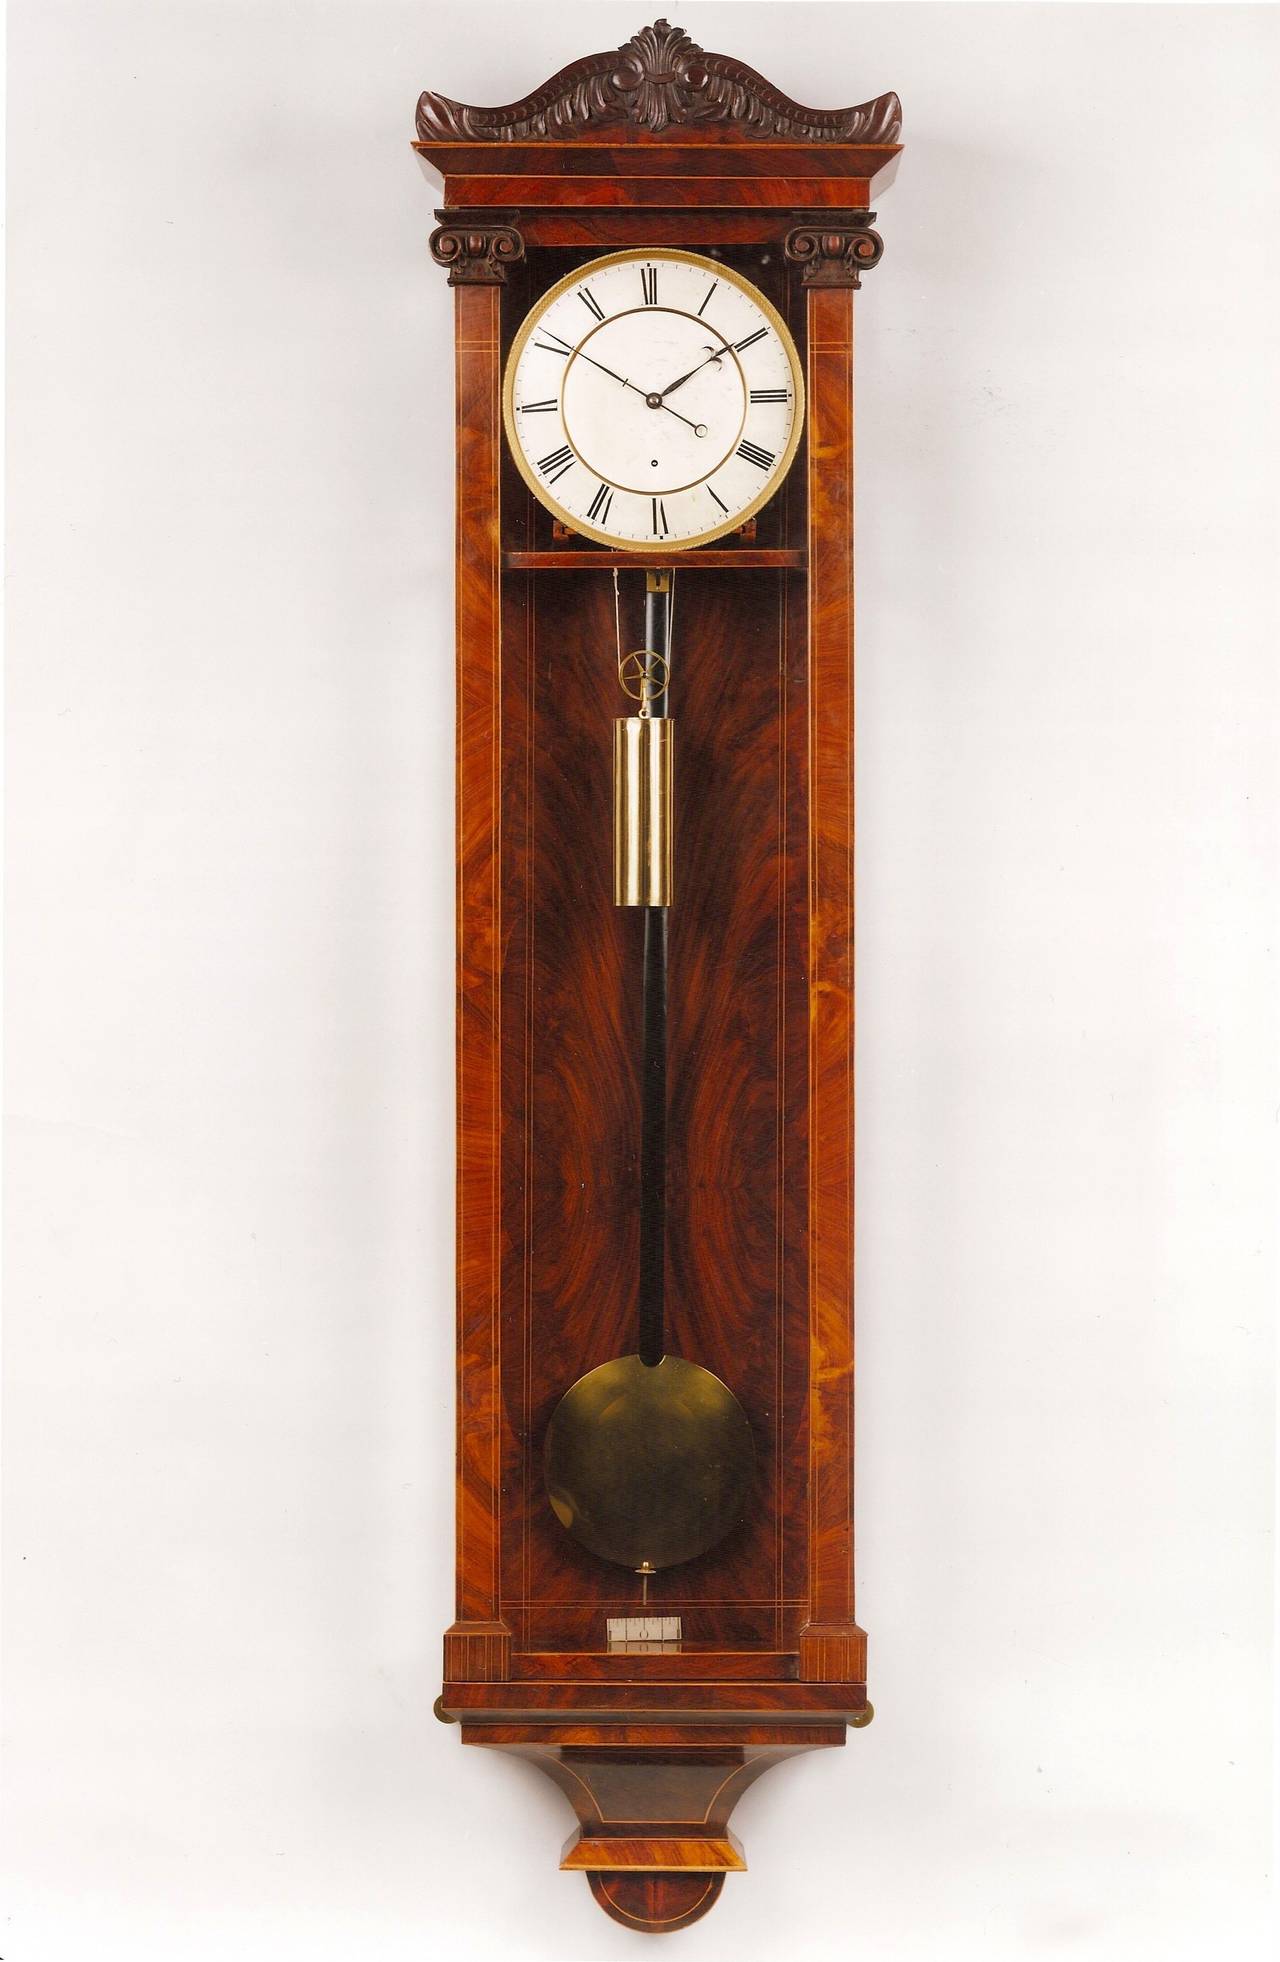 Antique Viennese long duration wall clock For Sale at 1stdibs